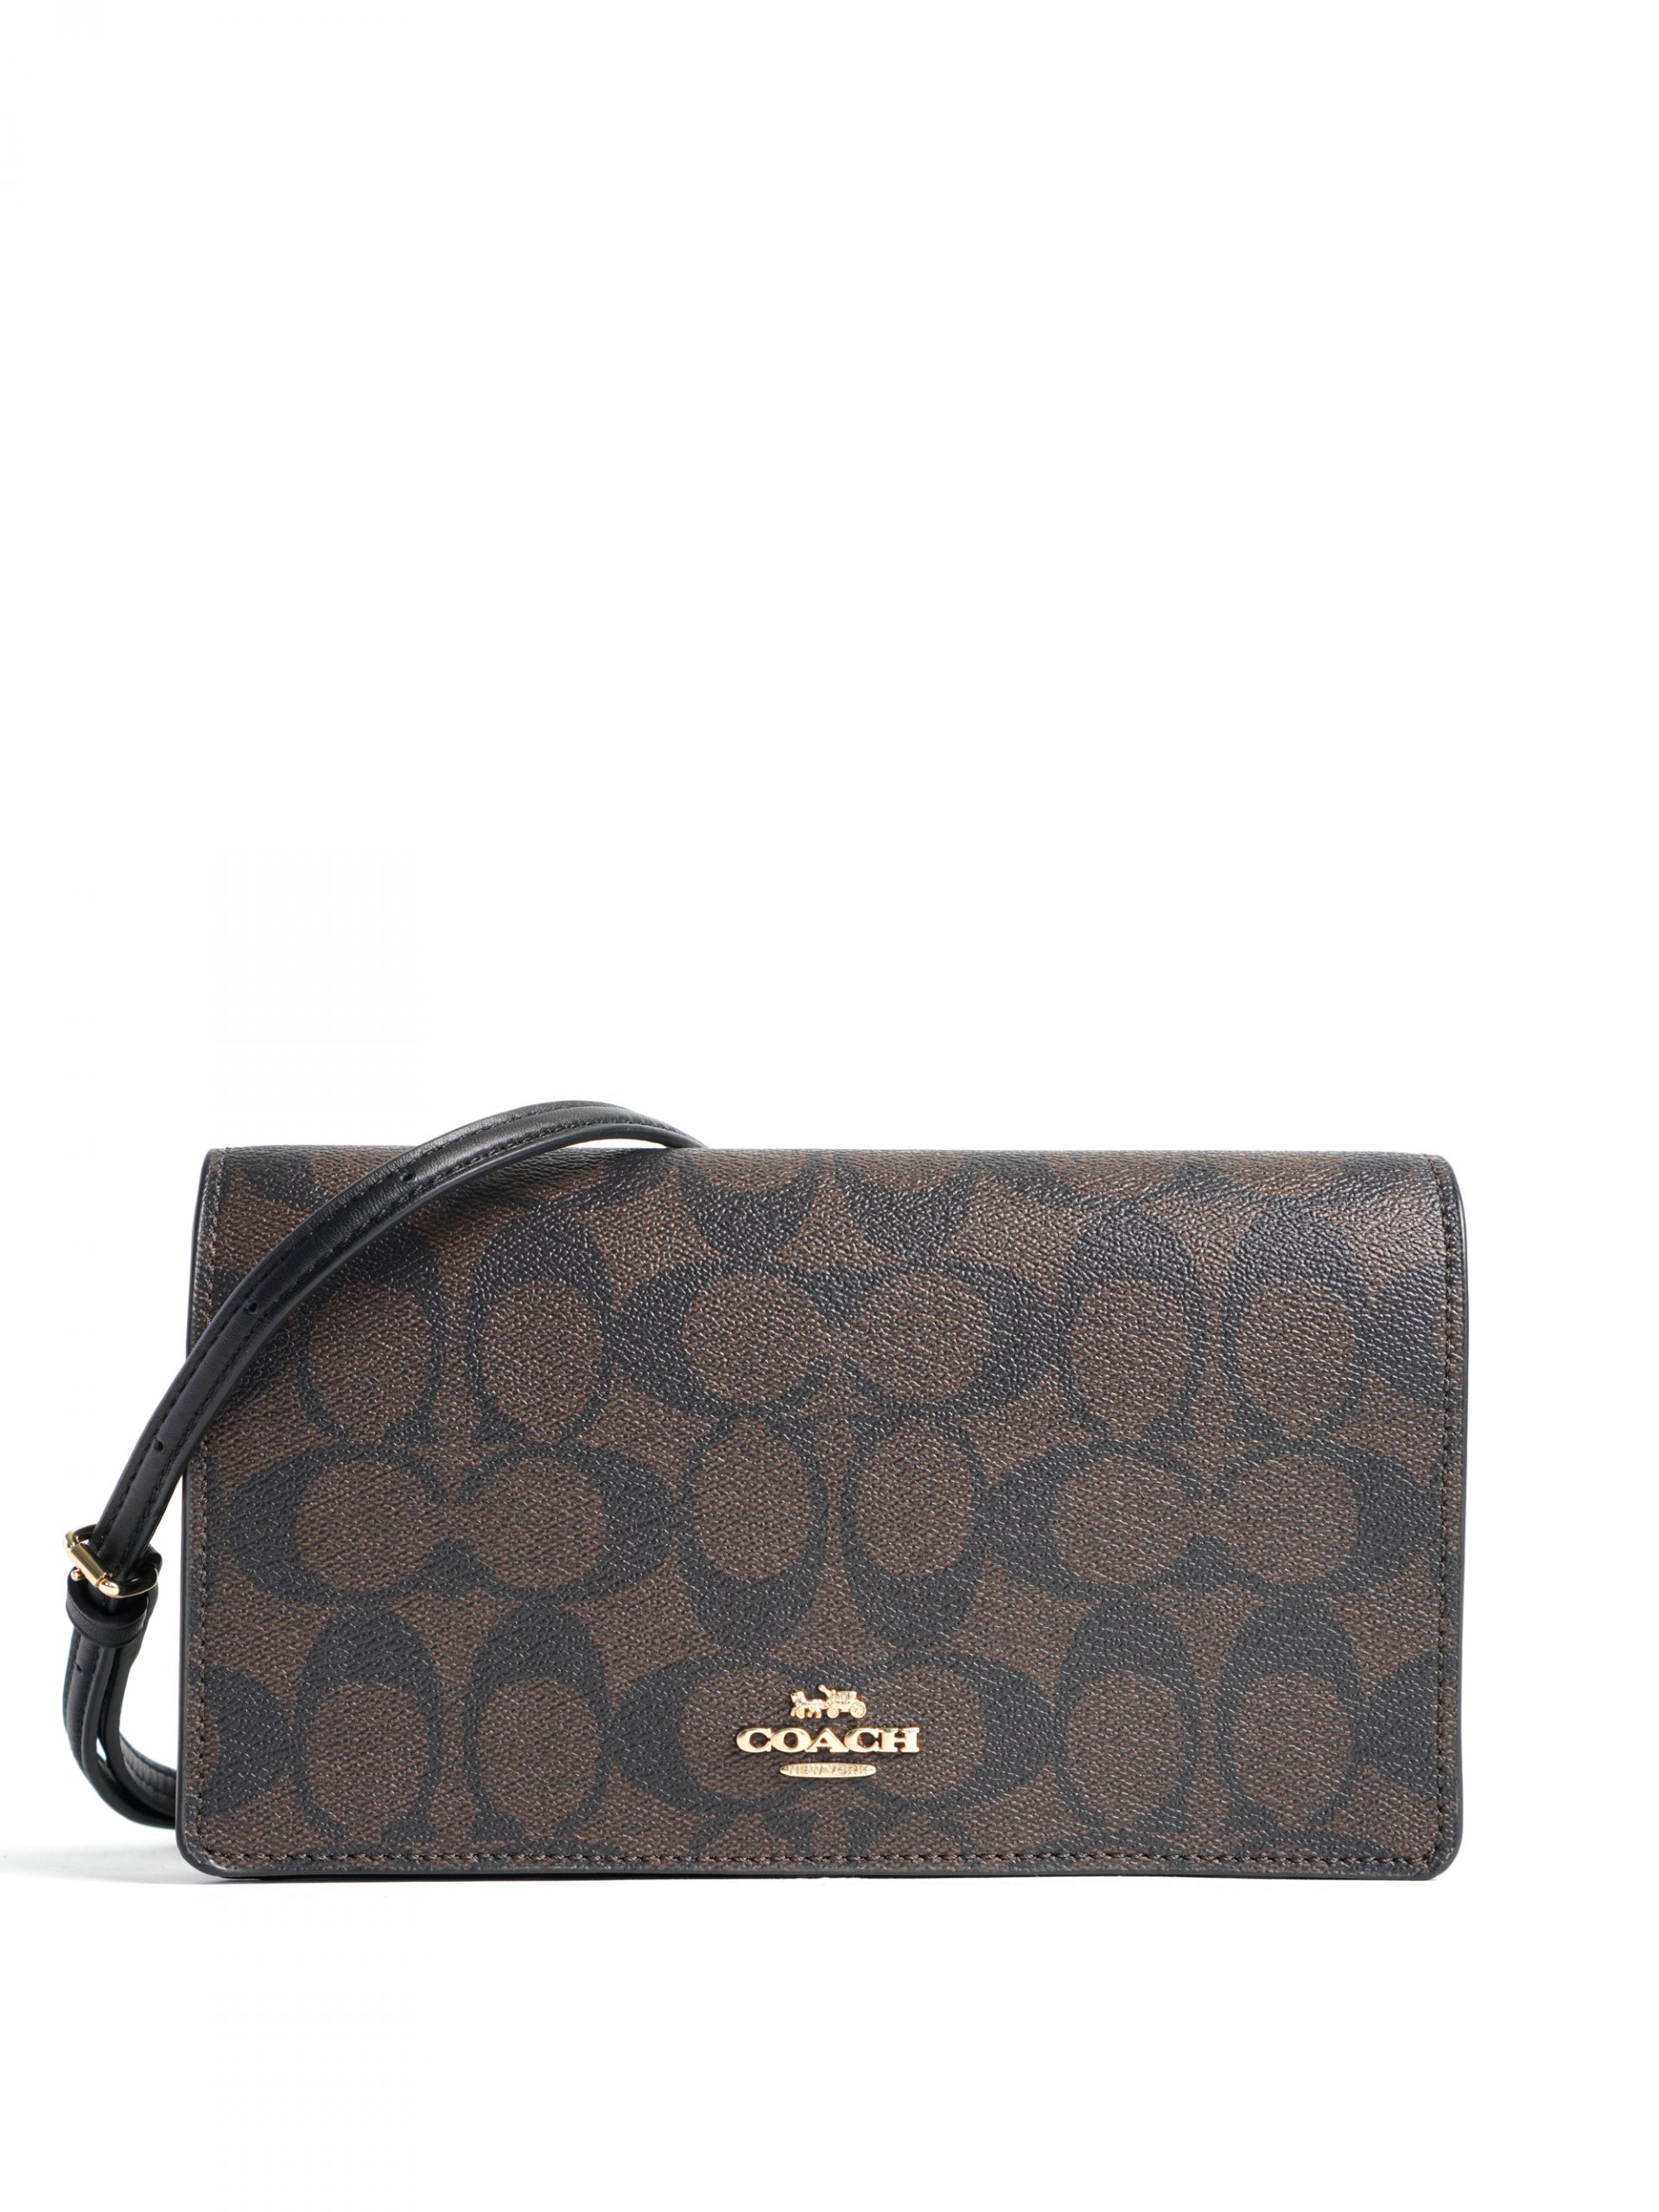 Coach Brown/Black Signature Coated Canvas and Leather Anna Foldover Crossbody Clutch